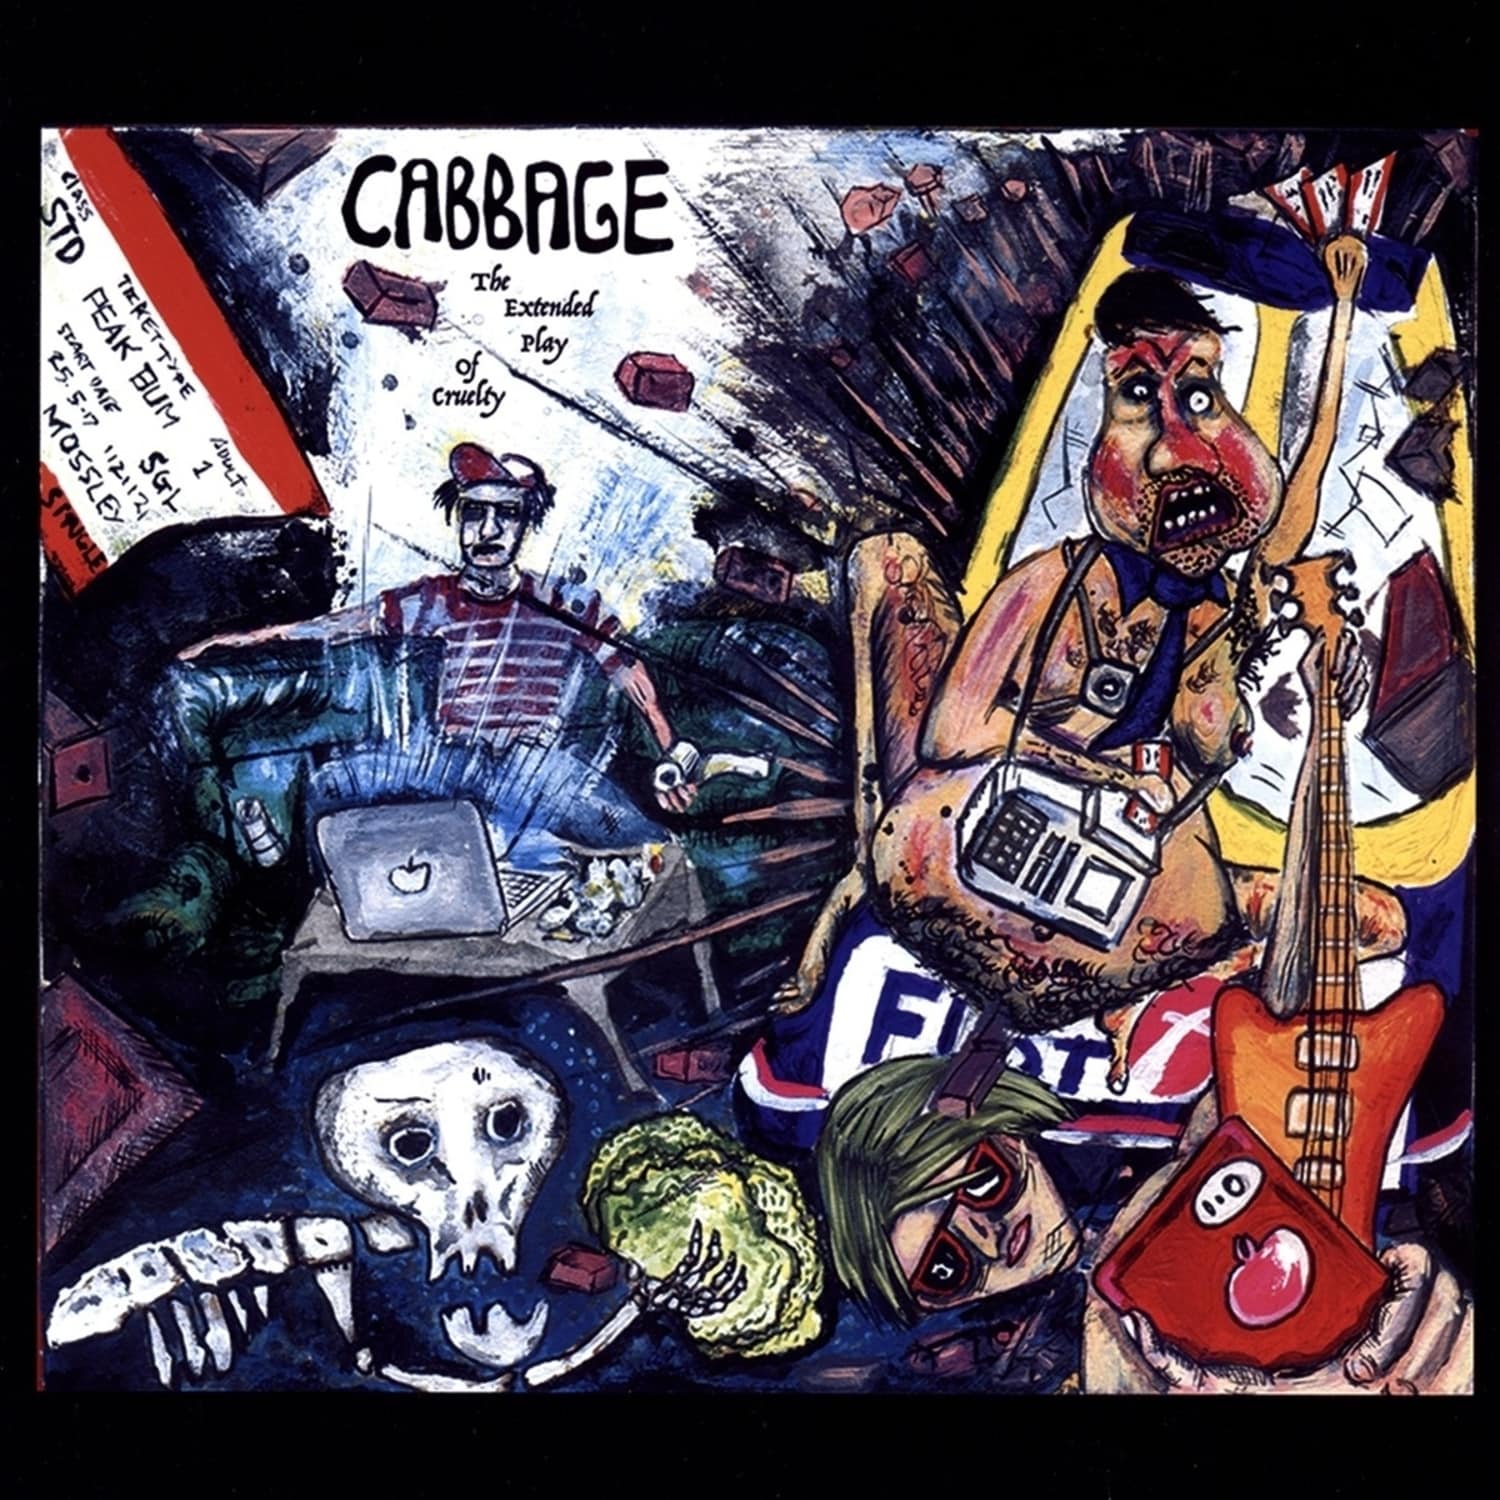 Cabbage - THE EXTENDED PLAY OF CRUELTY 